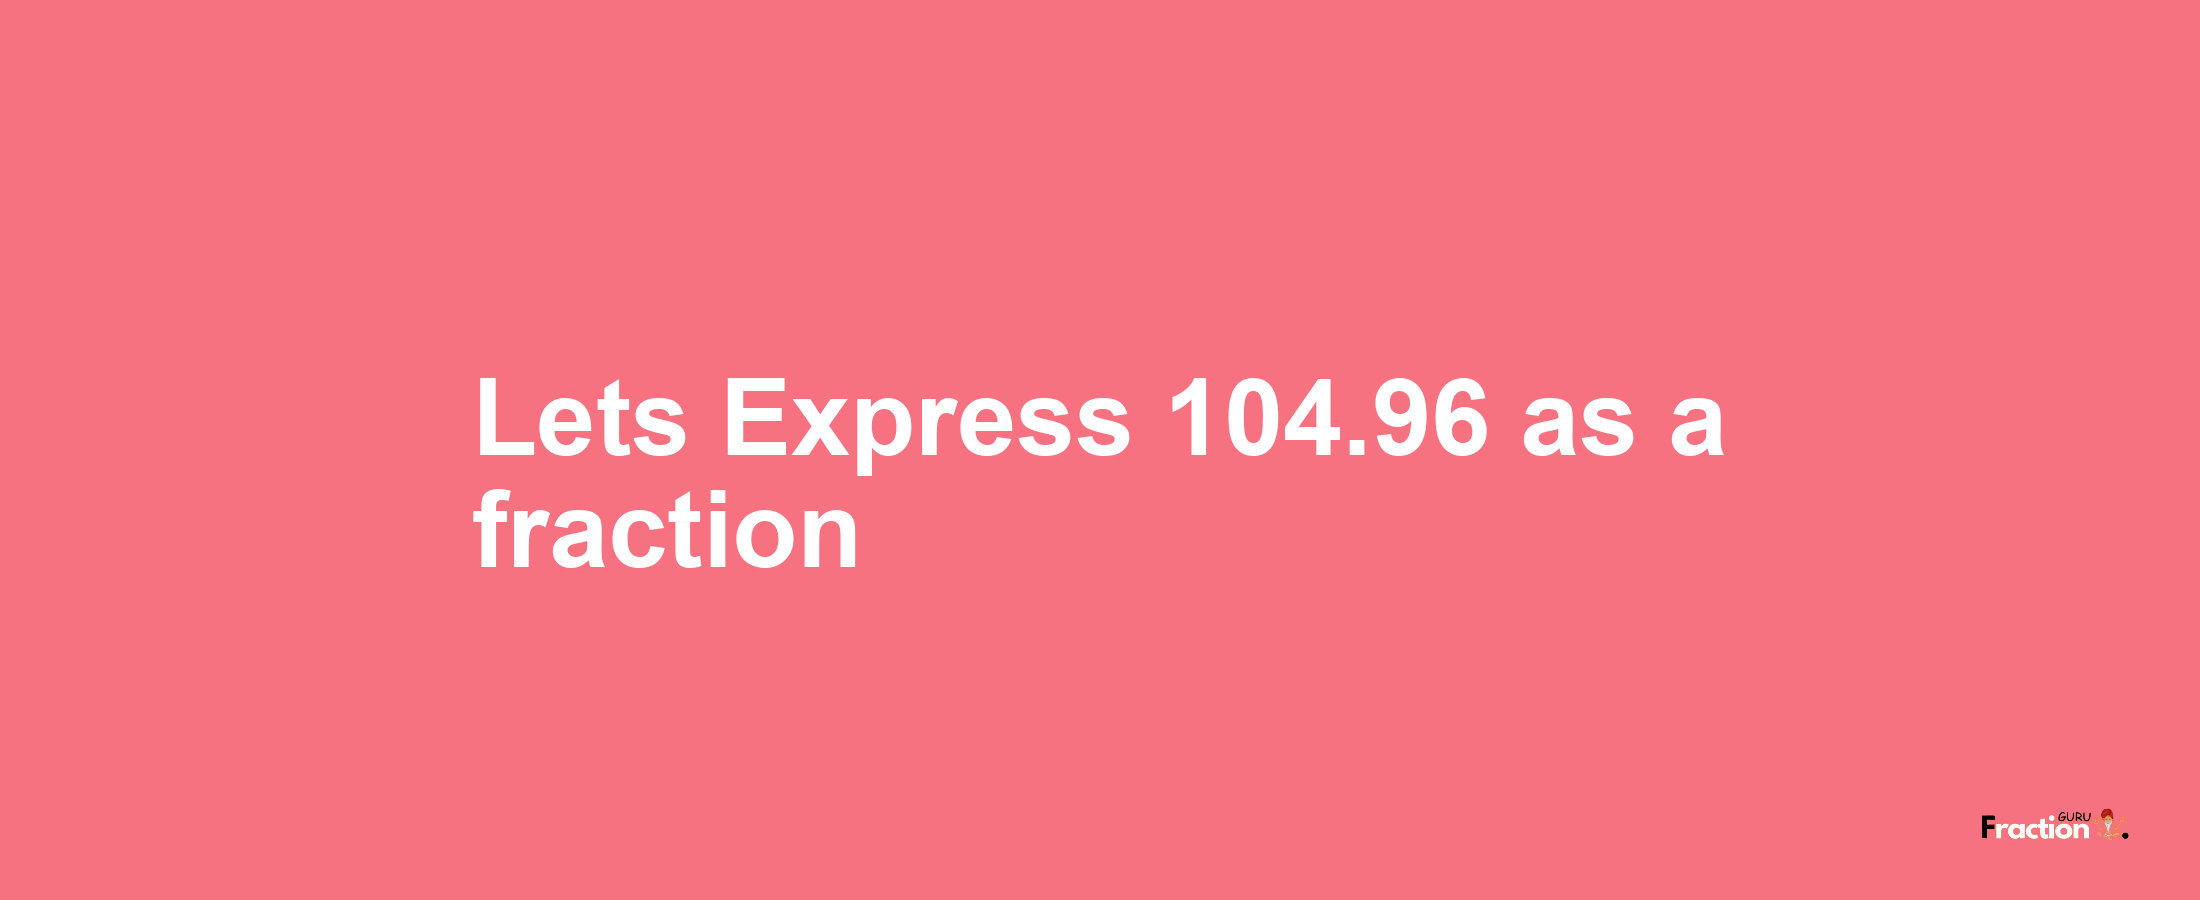 Lets Express 104.96 as afraction